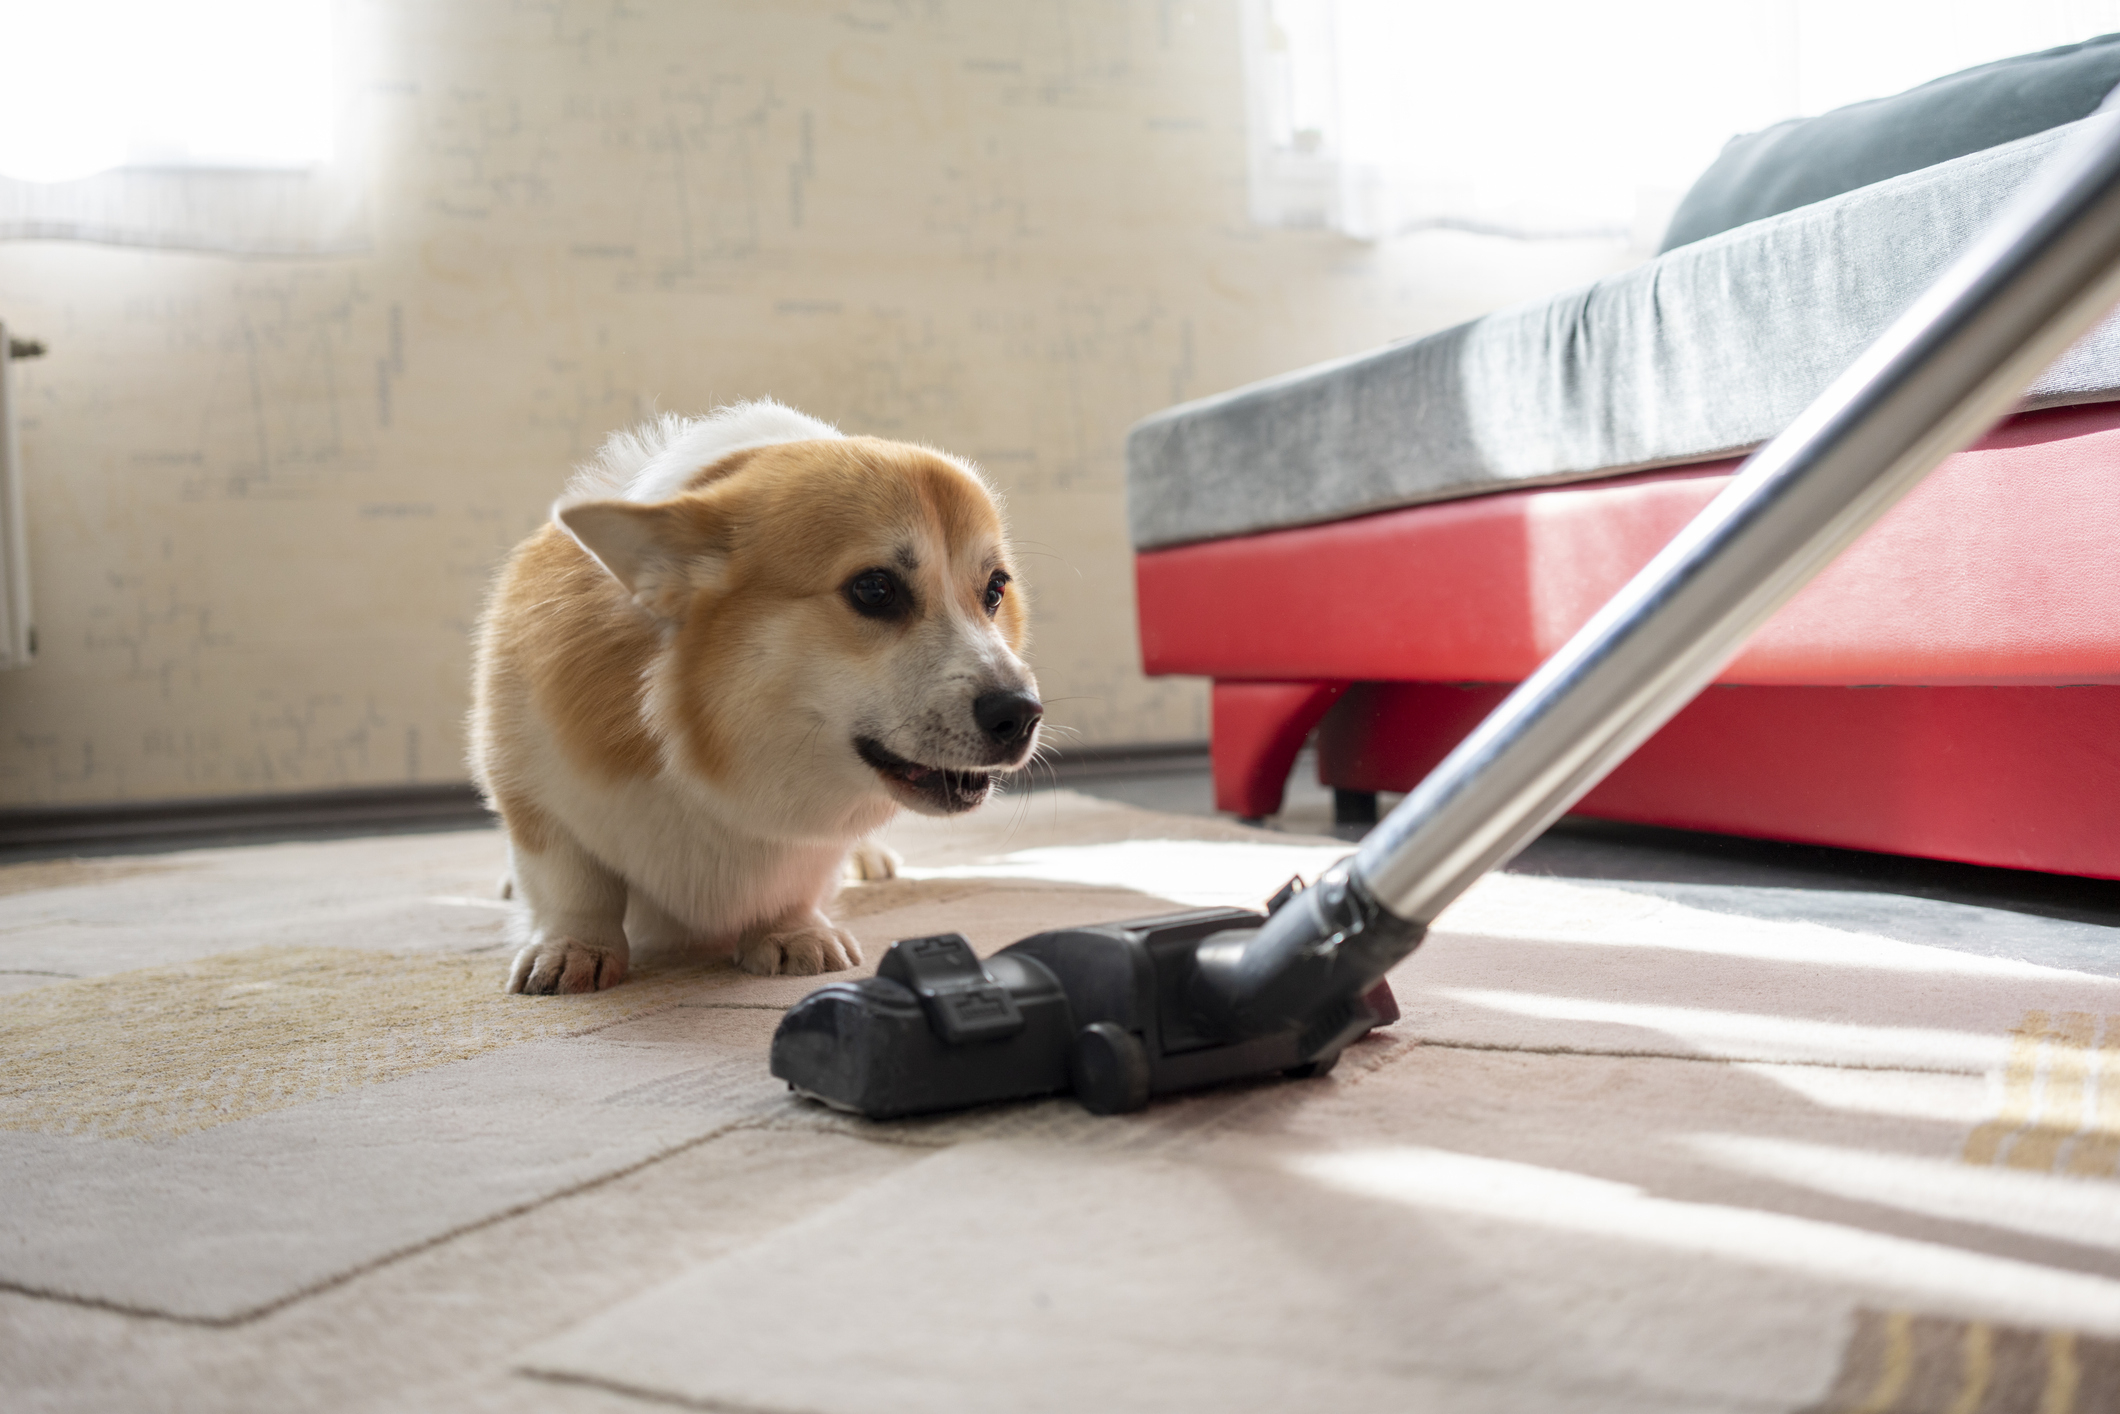 Corgi dog beside a vacuum cleaner in a living room, appearing curious or startled